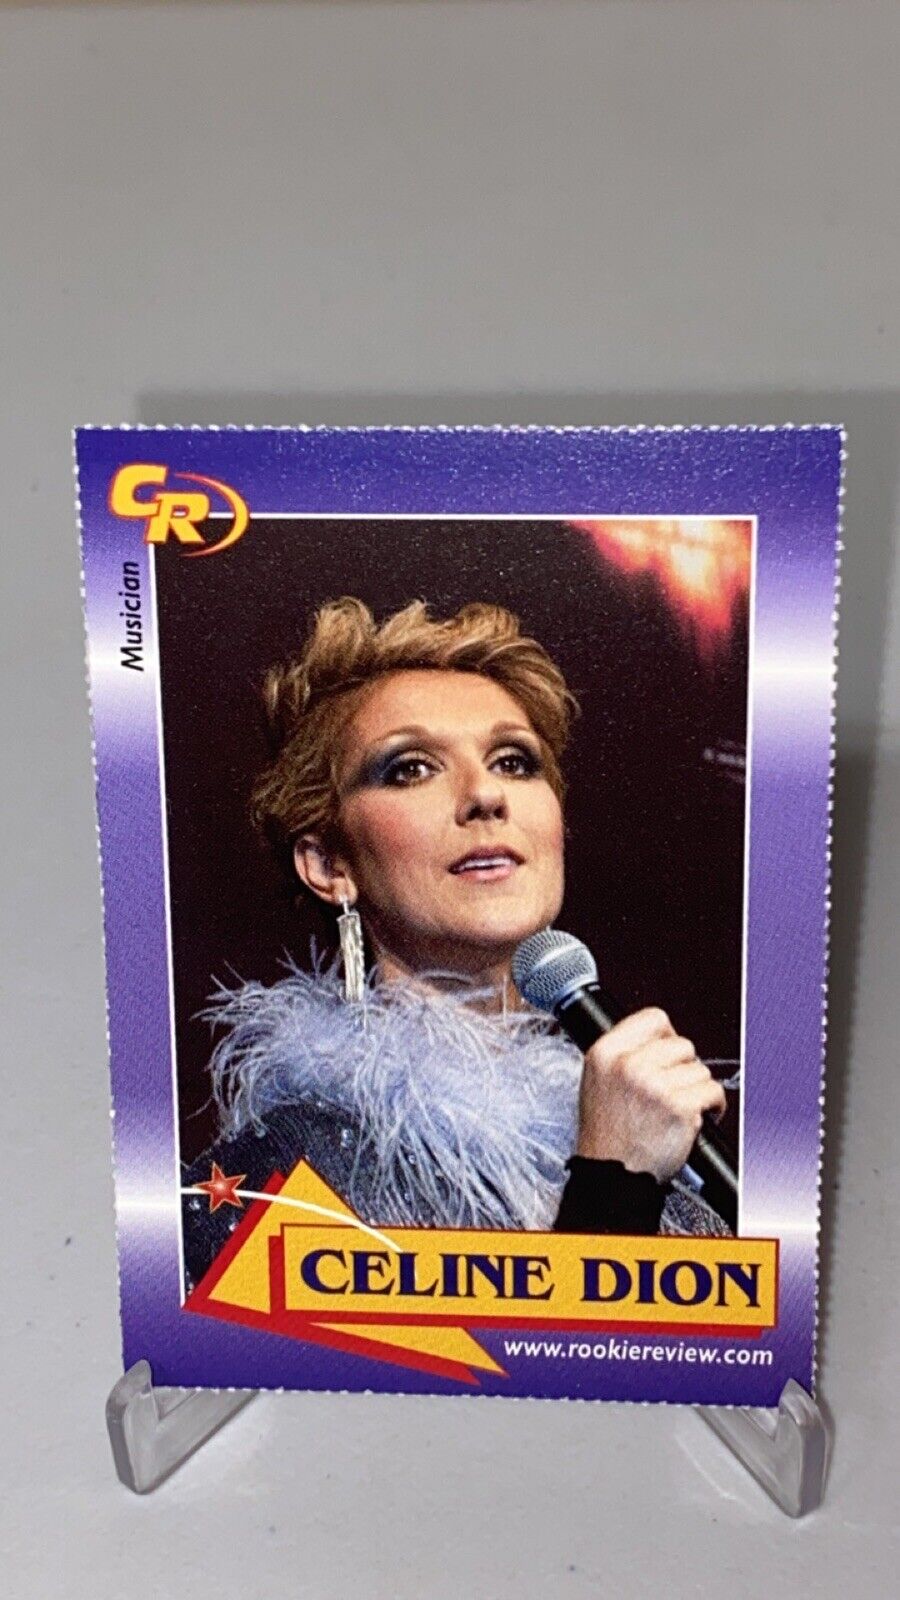 2003 Celebrity Review Rookie Review Celine Dion Musician/Actor Card #5